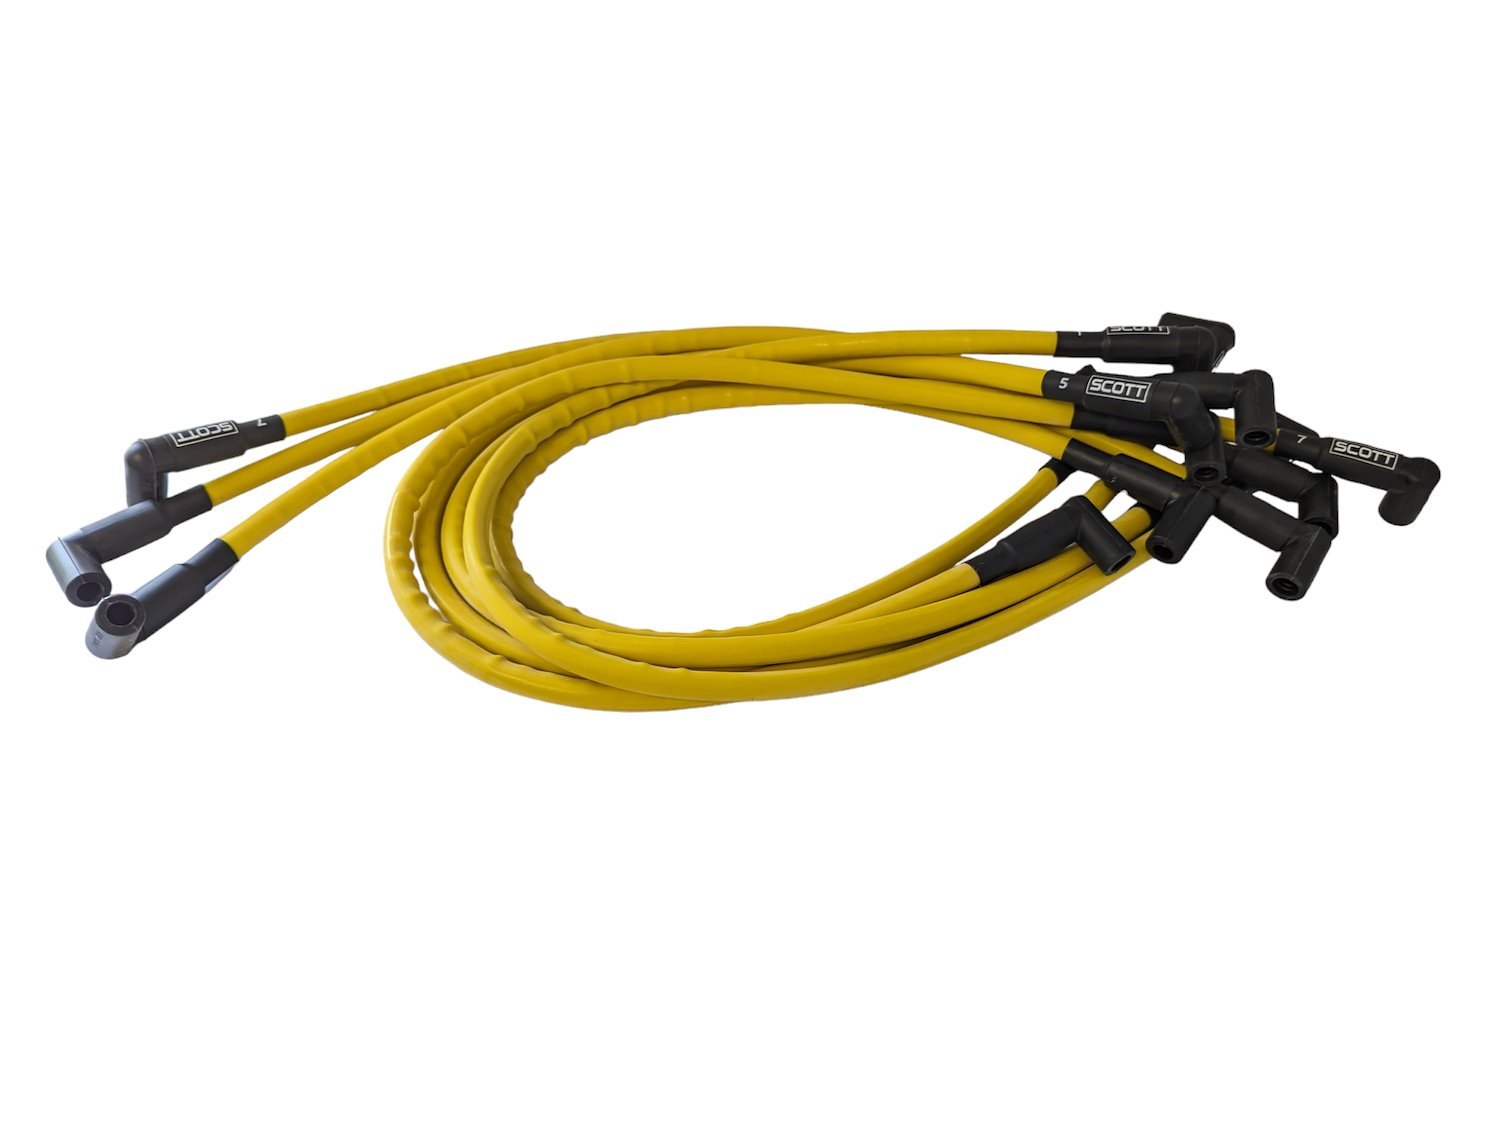 SPW300-CH-530-7 Super Mag Fiberglass-Oversleeved Spark Plug Wire Set for Big Block Ford Dragster, Under Header [Yellow]